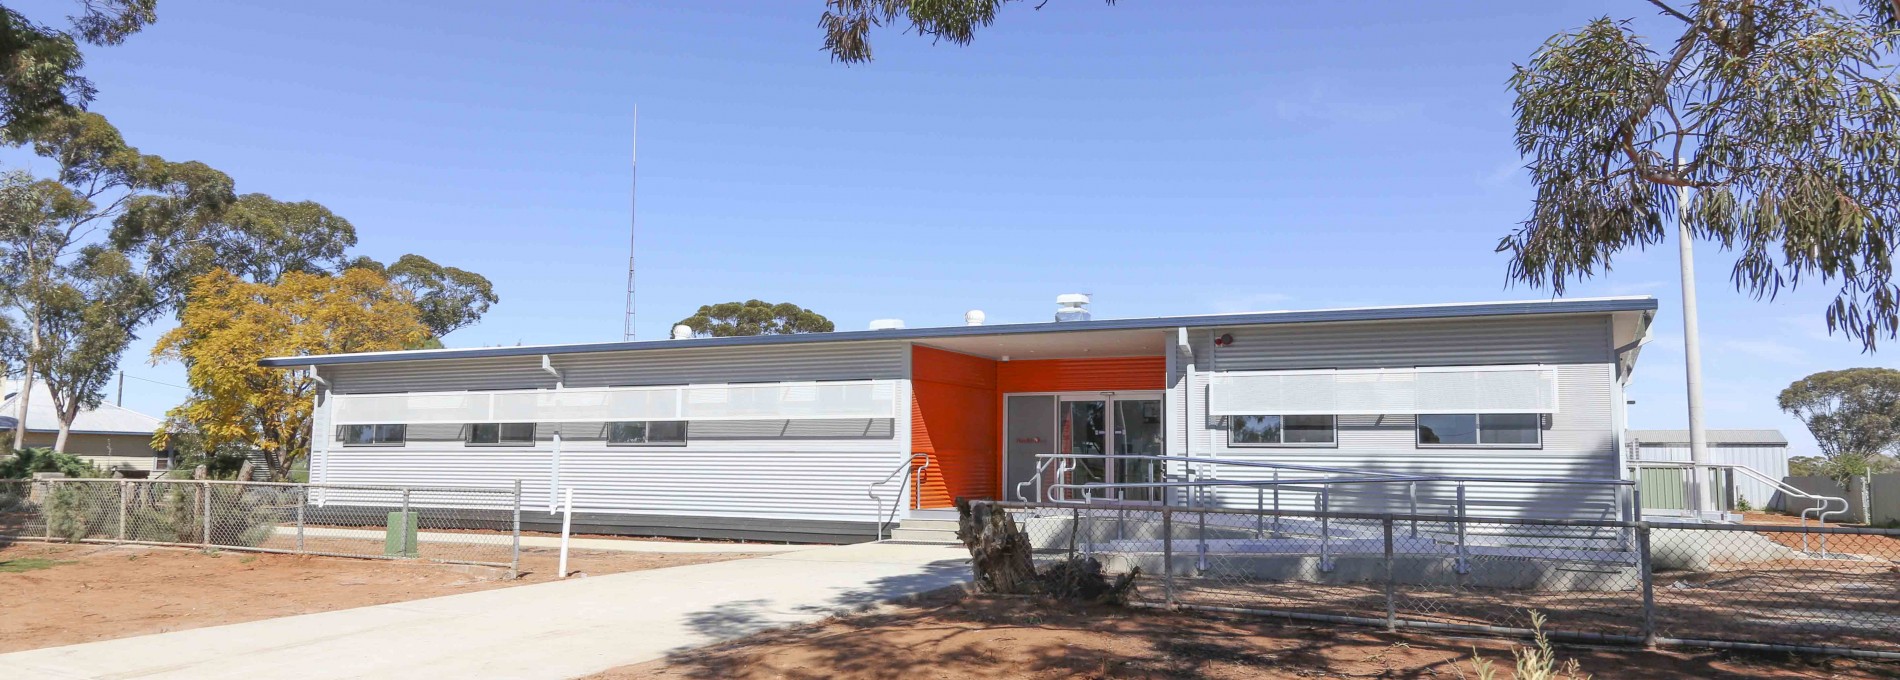 Exterior of Aged Care Portable Building in front of Grounds